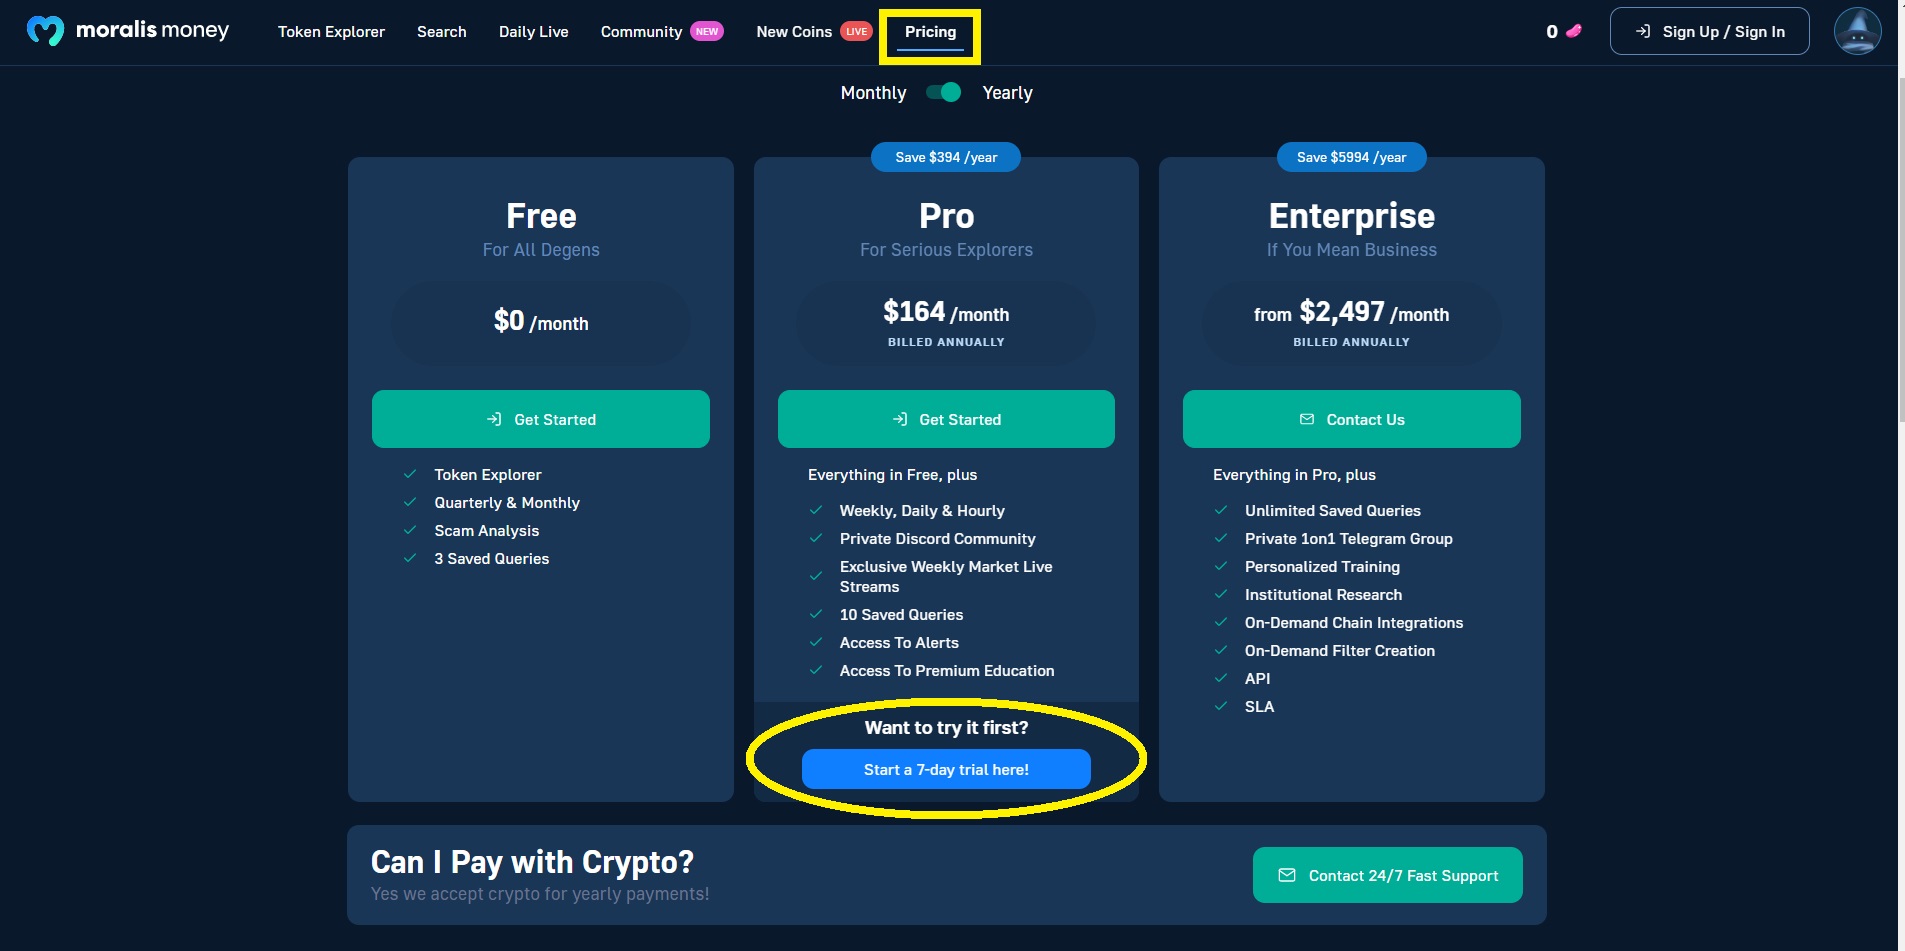 Find-the-next-Crypto-Rangers-CR-token-with-Moralis-Money-Pro-with-7-day-trial